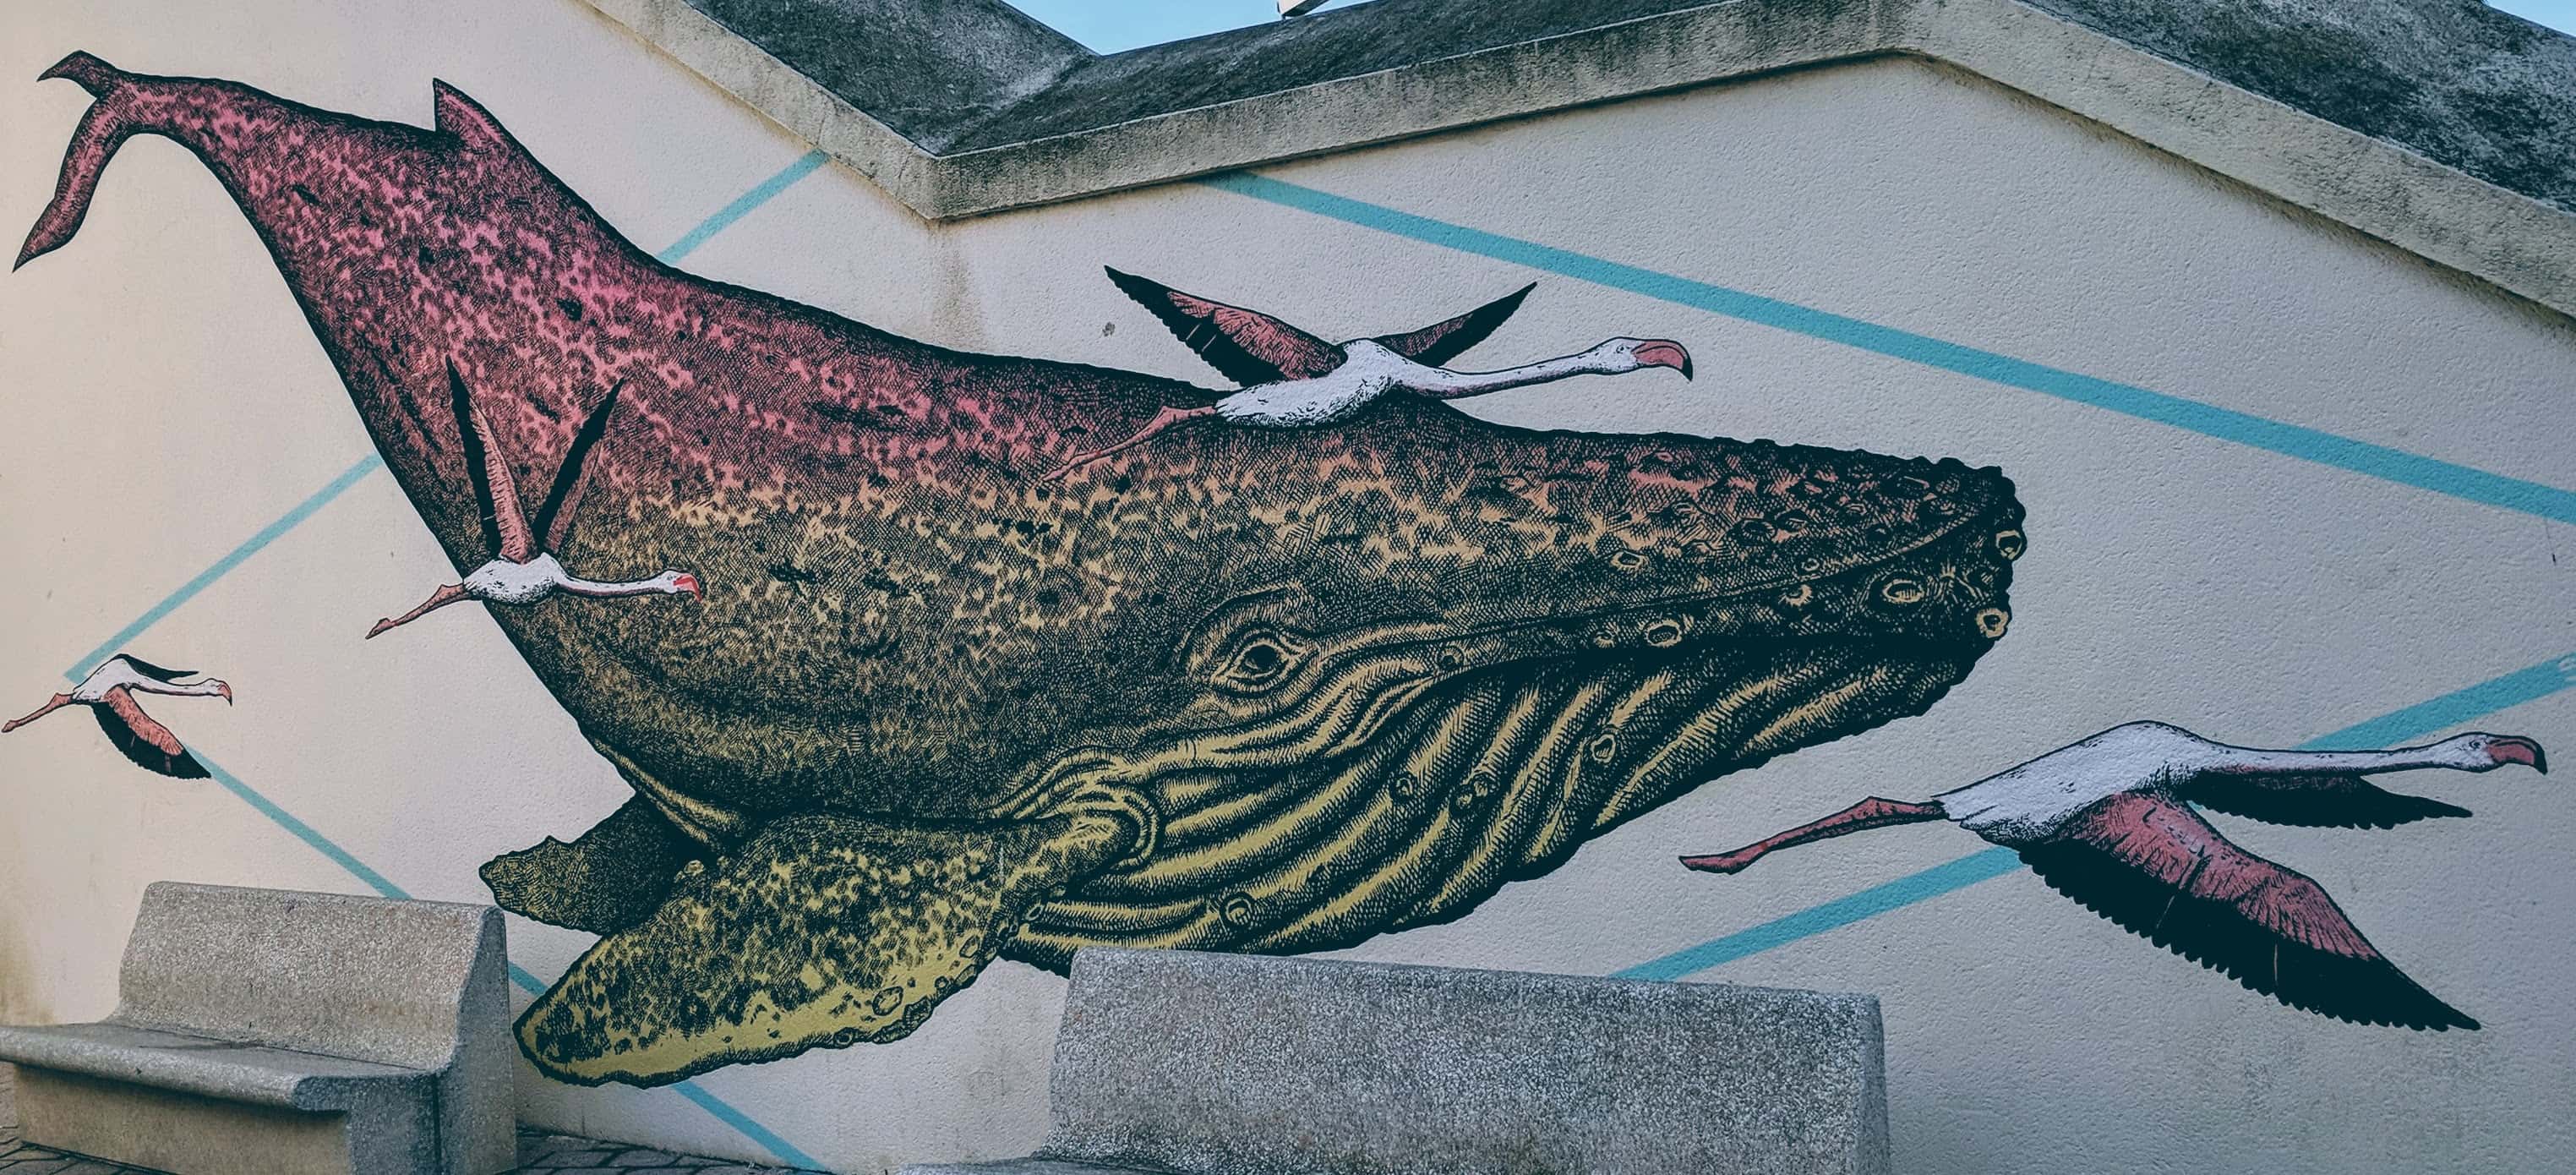 Graffiti of a whale surrounded by flying flamingos